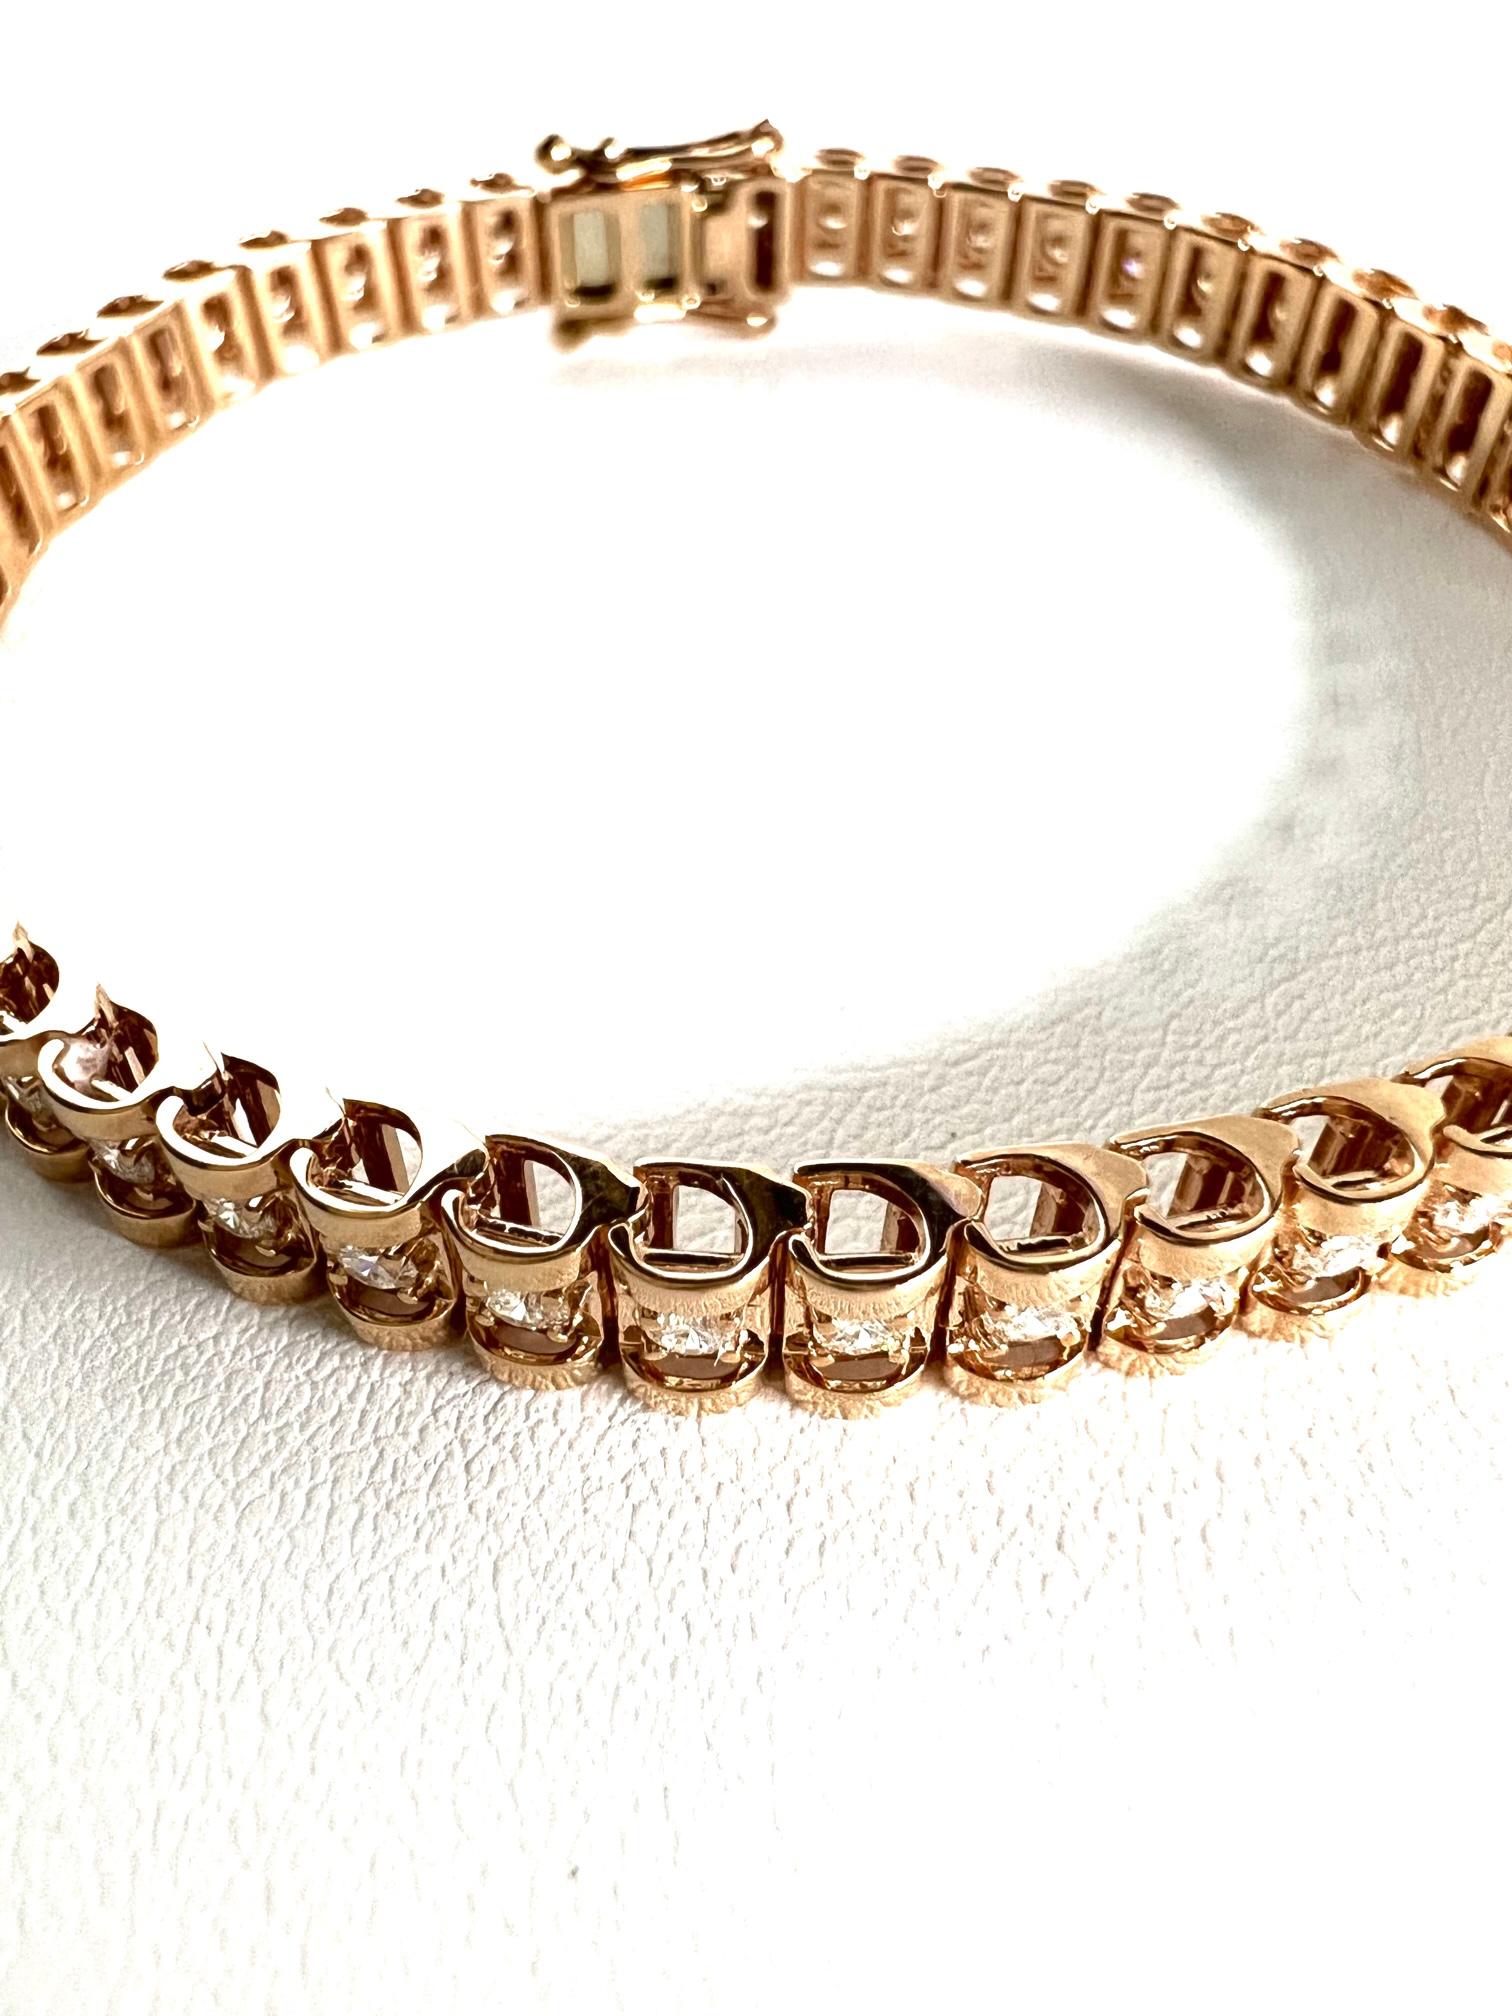 Women's Bracelet in Red Gold with Diamonds For Sale